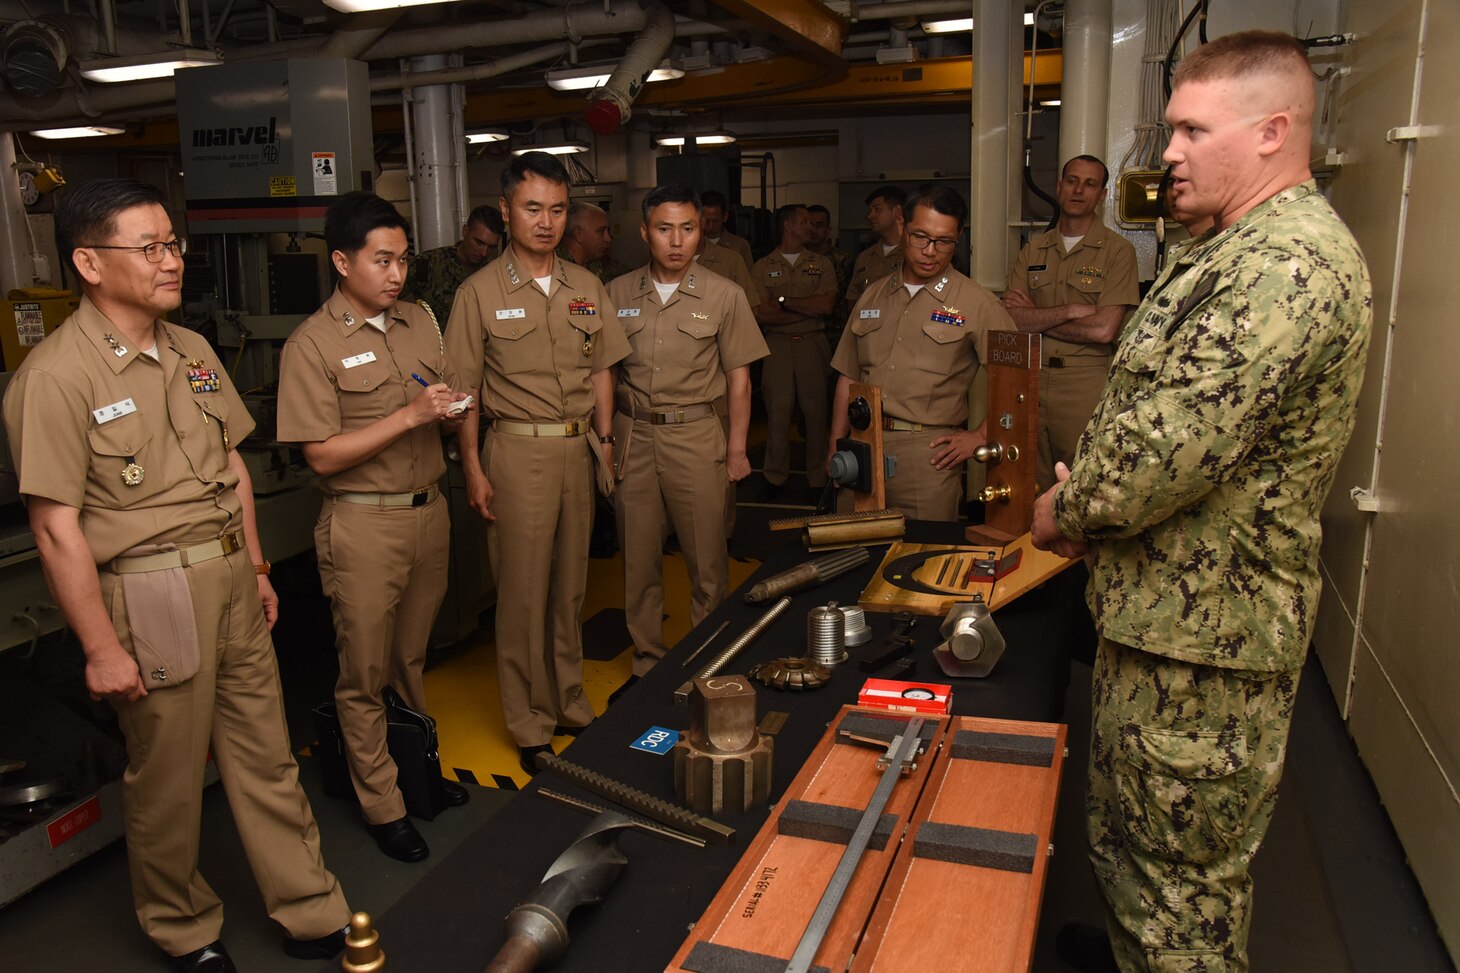 APRA HARBOR, Guam (June 18, 2019) Machinery Repairman 2nd Class Marcus Flake gives a presentation to Rear Adm. Jung II Shik, commander of the Republic of Korea Navy Submarine Force, left, and other Republic of Korea Navy personnel during a tour of the machine shop on the submarine tender USS Emory S. Land (AS 39), June 18. Rear Adm. Jung is in Guam attending the 49th annual Submarine Warfare Committee meeting. During the meeting, U.S. and Korean officials discuss interoperability, the planning of combined training opportunities, and continued development of integrated anti-submarine warfare plans.